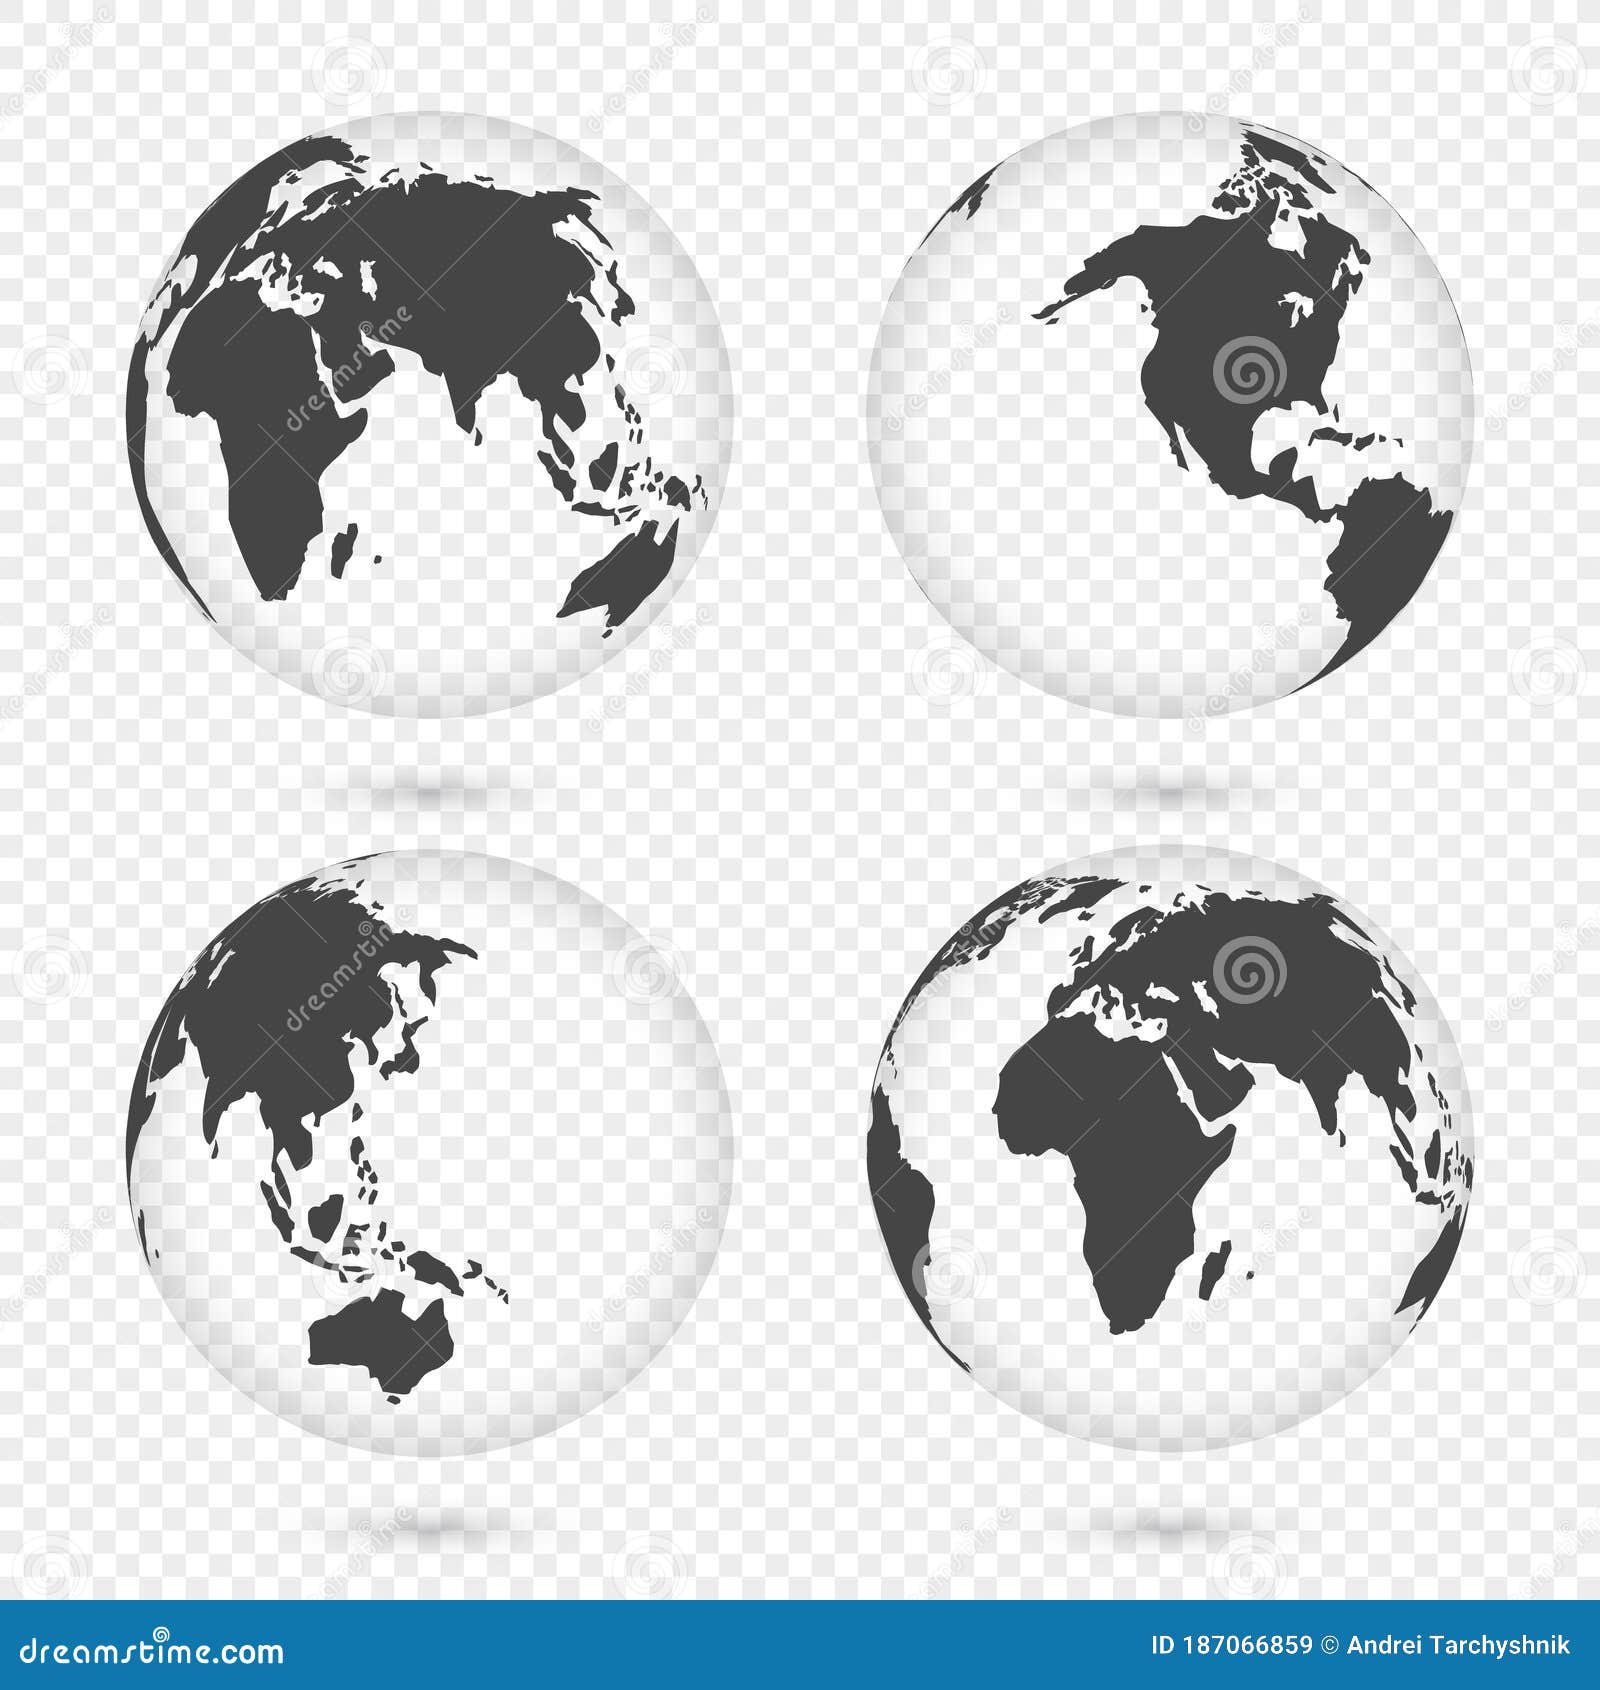 Earth Globe. World Map Set. Planet with Continents. Africa, Asia ...